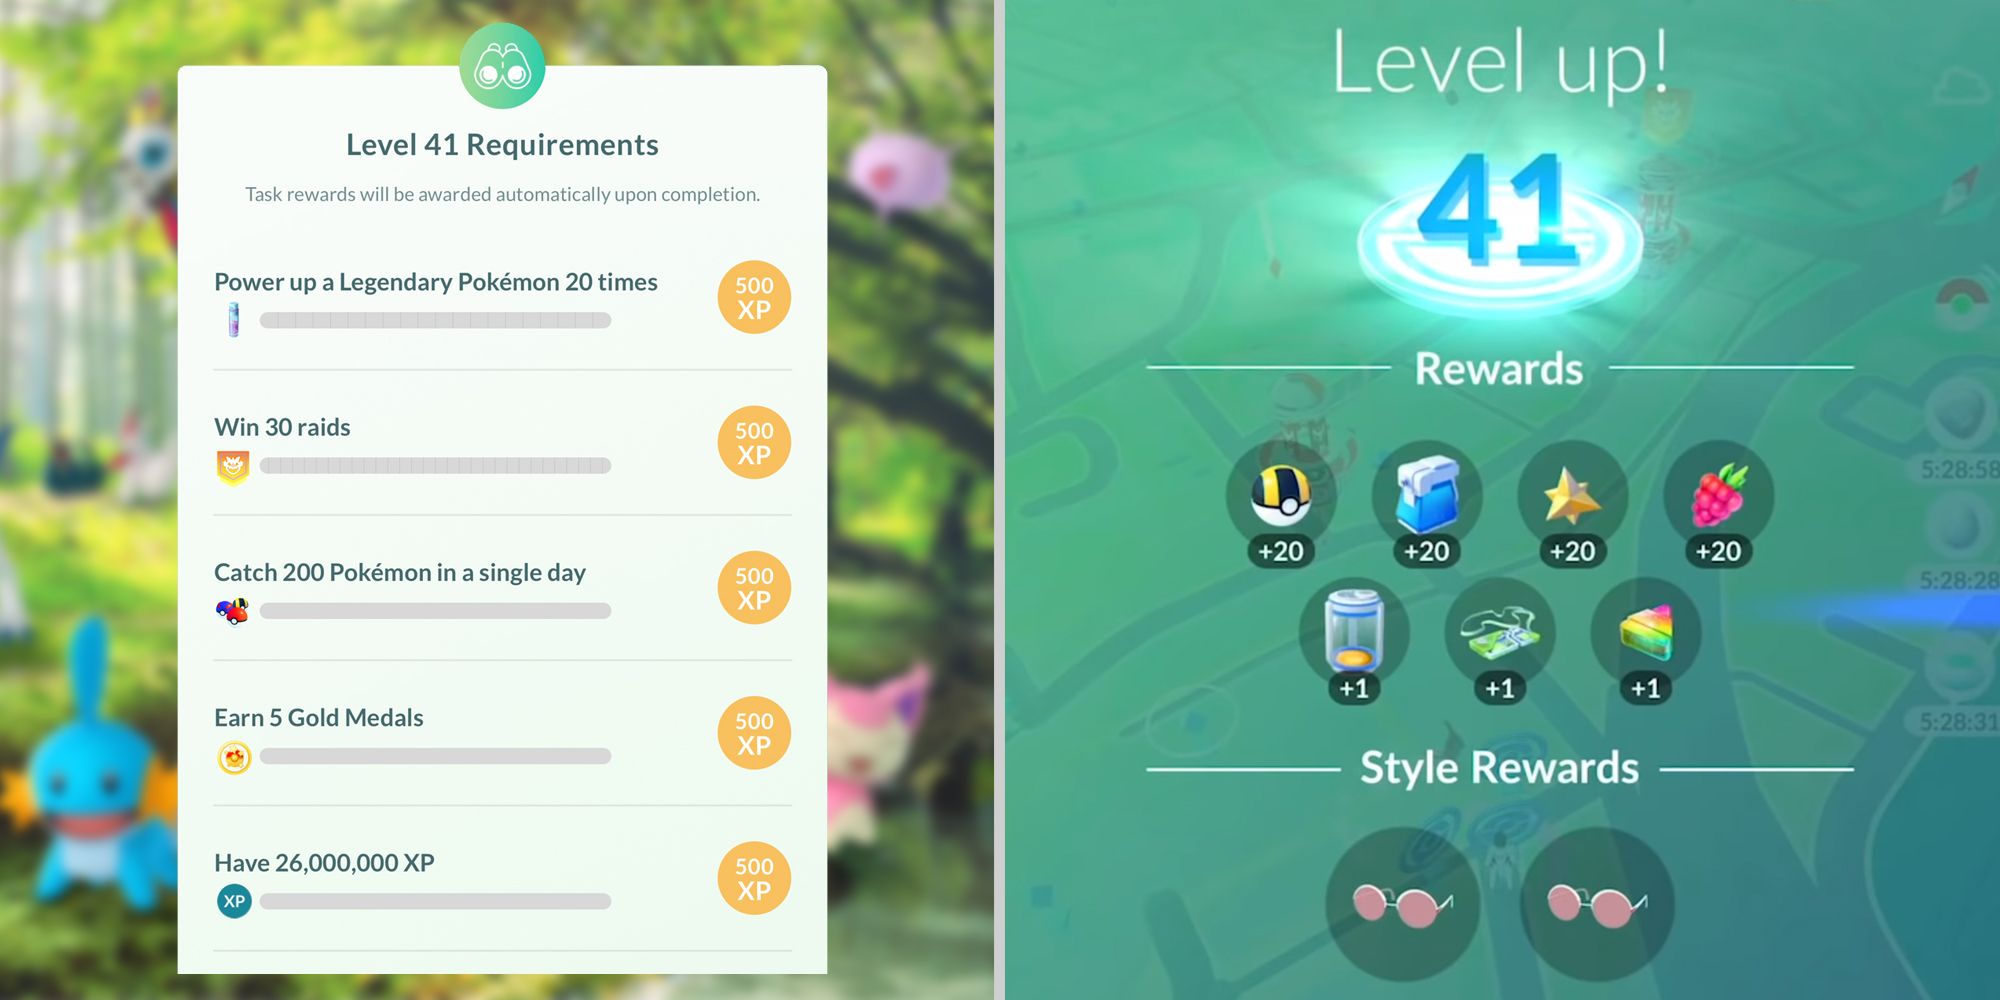 Requirements and rewards for level 41 in Pokemon Go